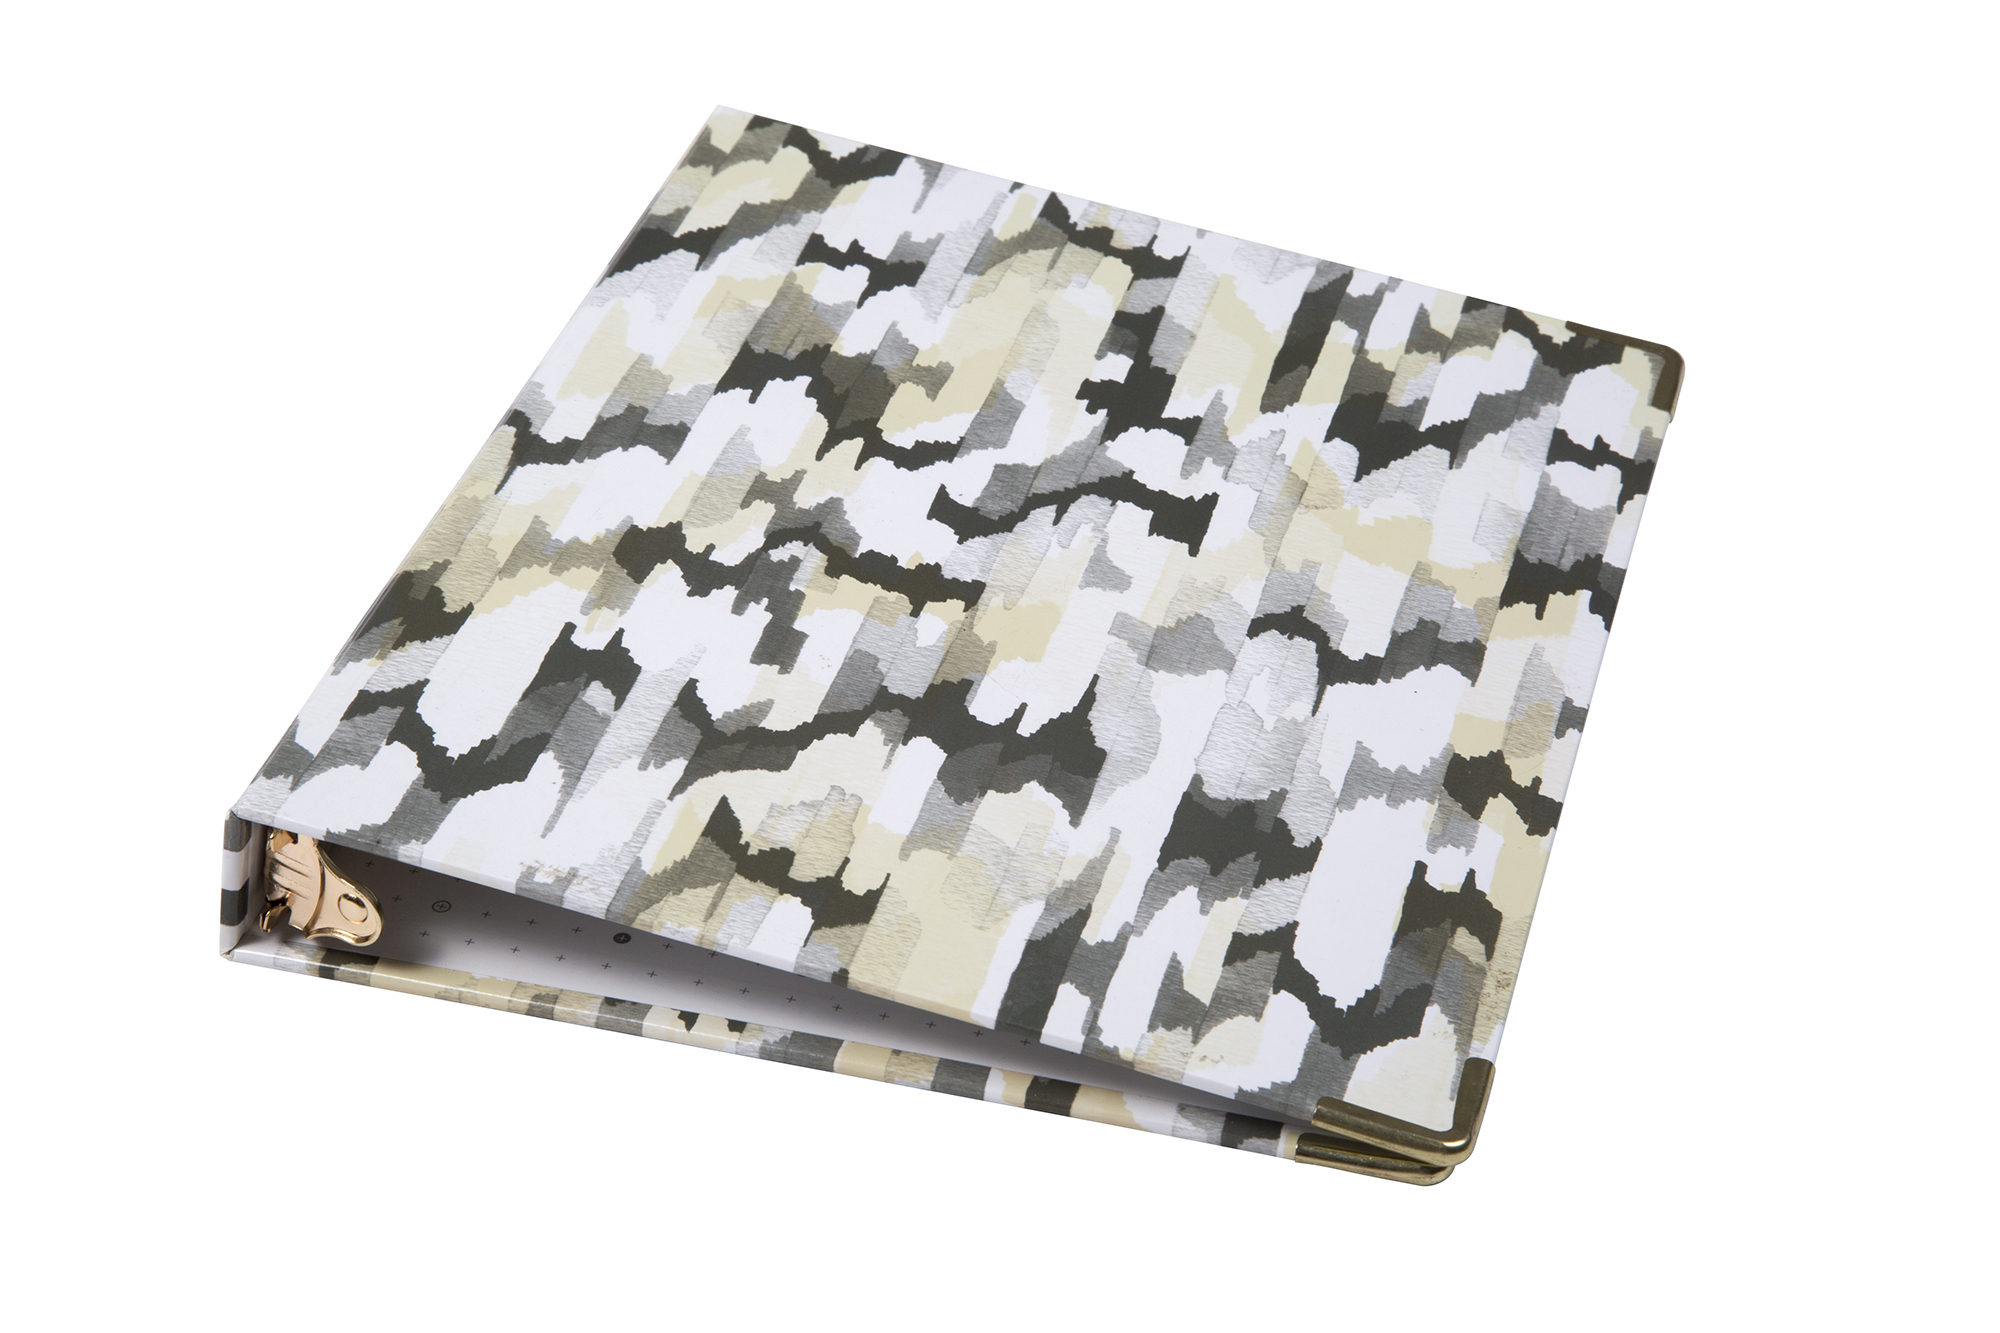 Russell &amp; Hazel ”Mini Pattern Binder” in ”Selby,” $35 at Candlefish